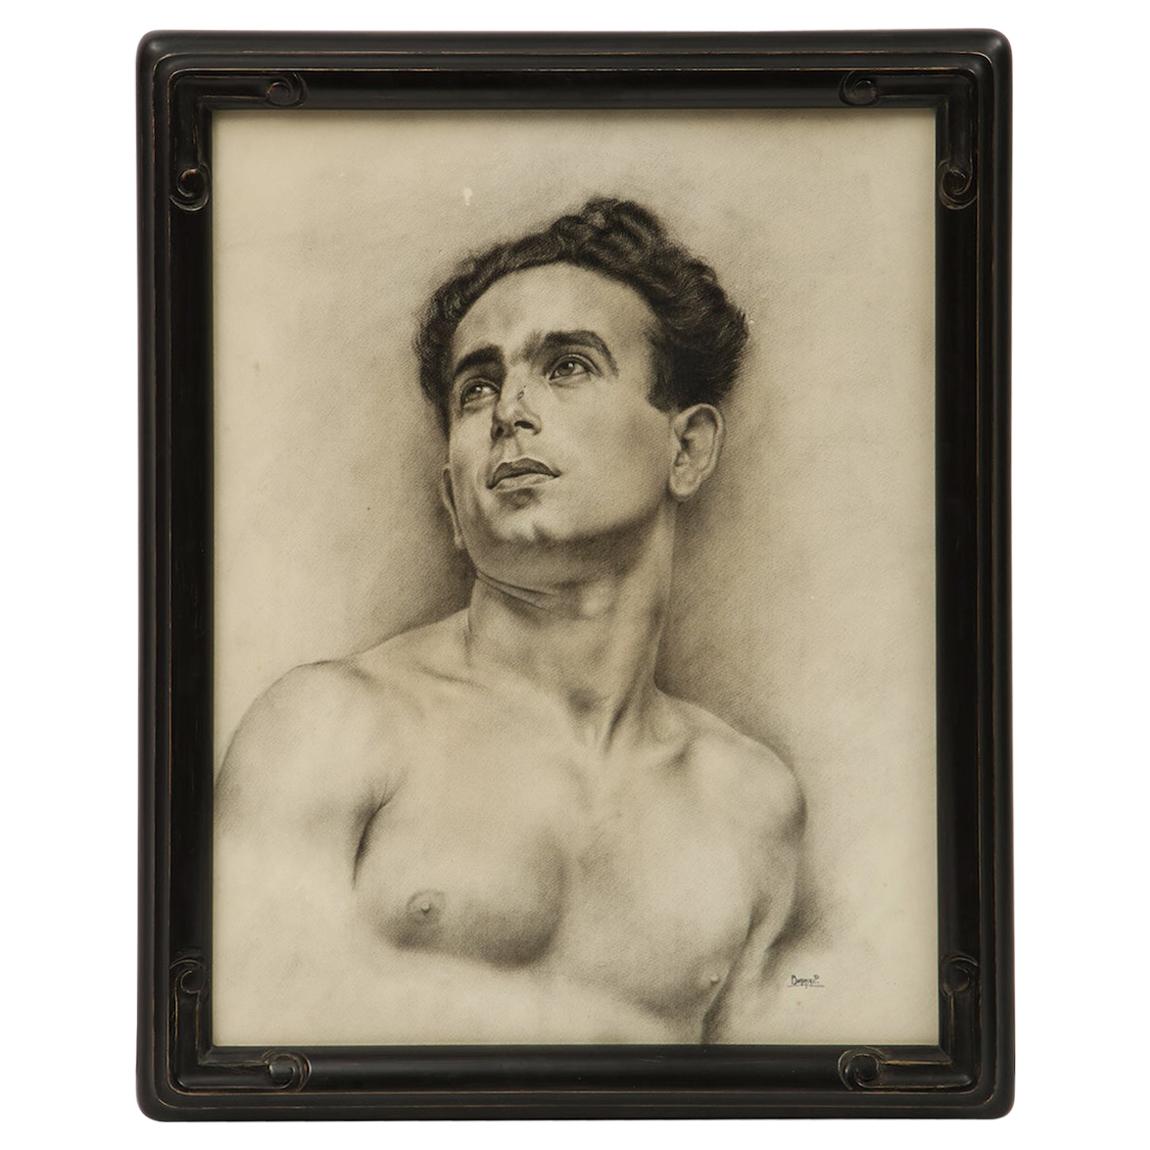 Charcoal Drawing of a Young Man by P. Bonamini